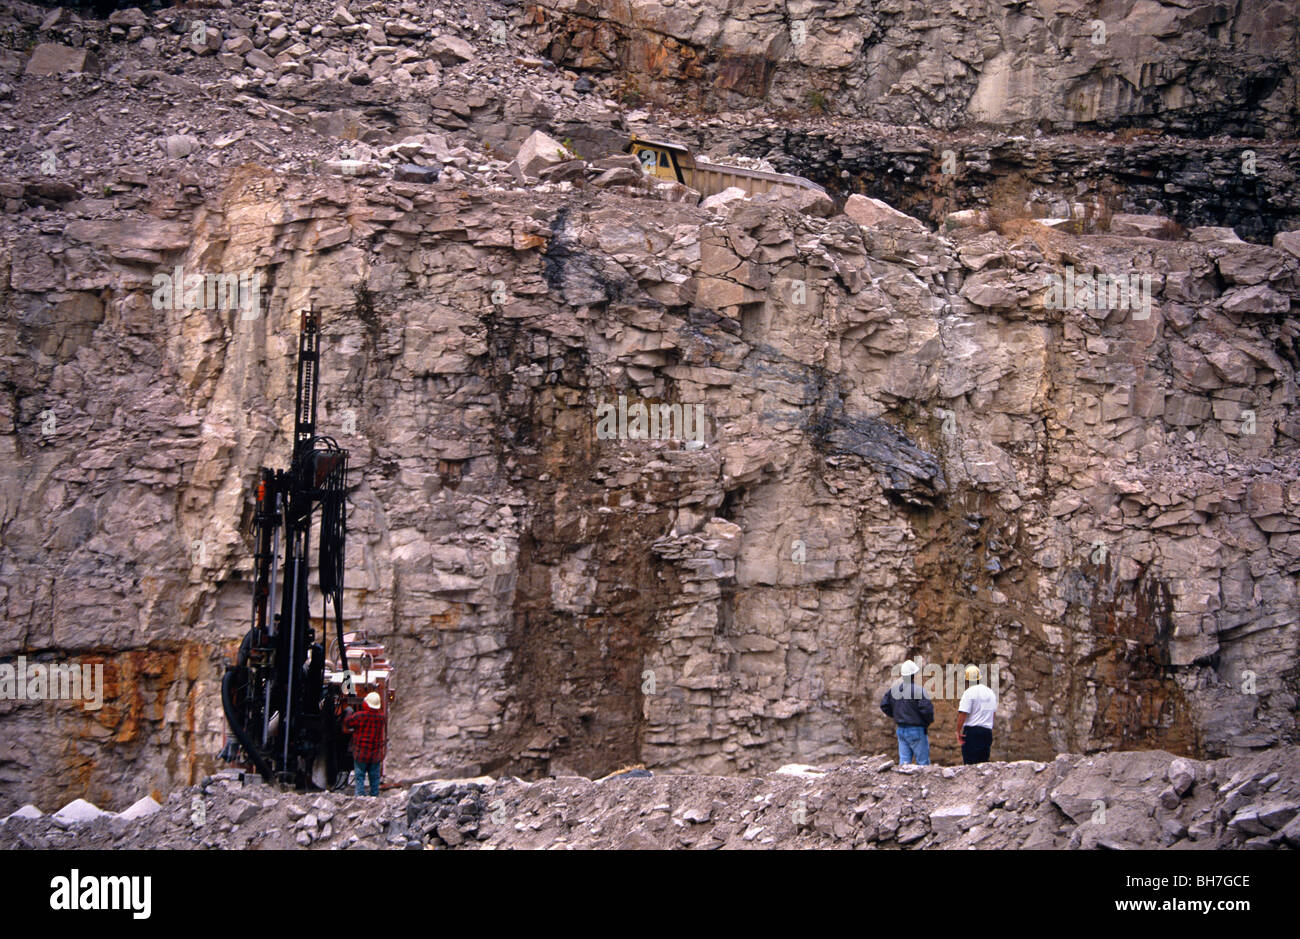 Three quarry workers and a boring drill machine are seen against rock strata in an open-air North Carolina pit. Stock Photo